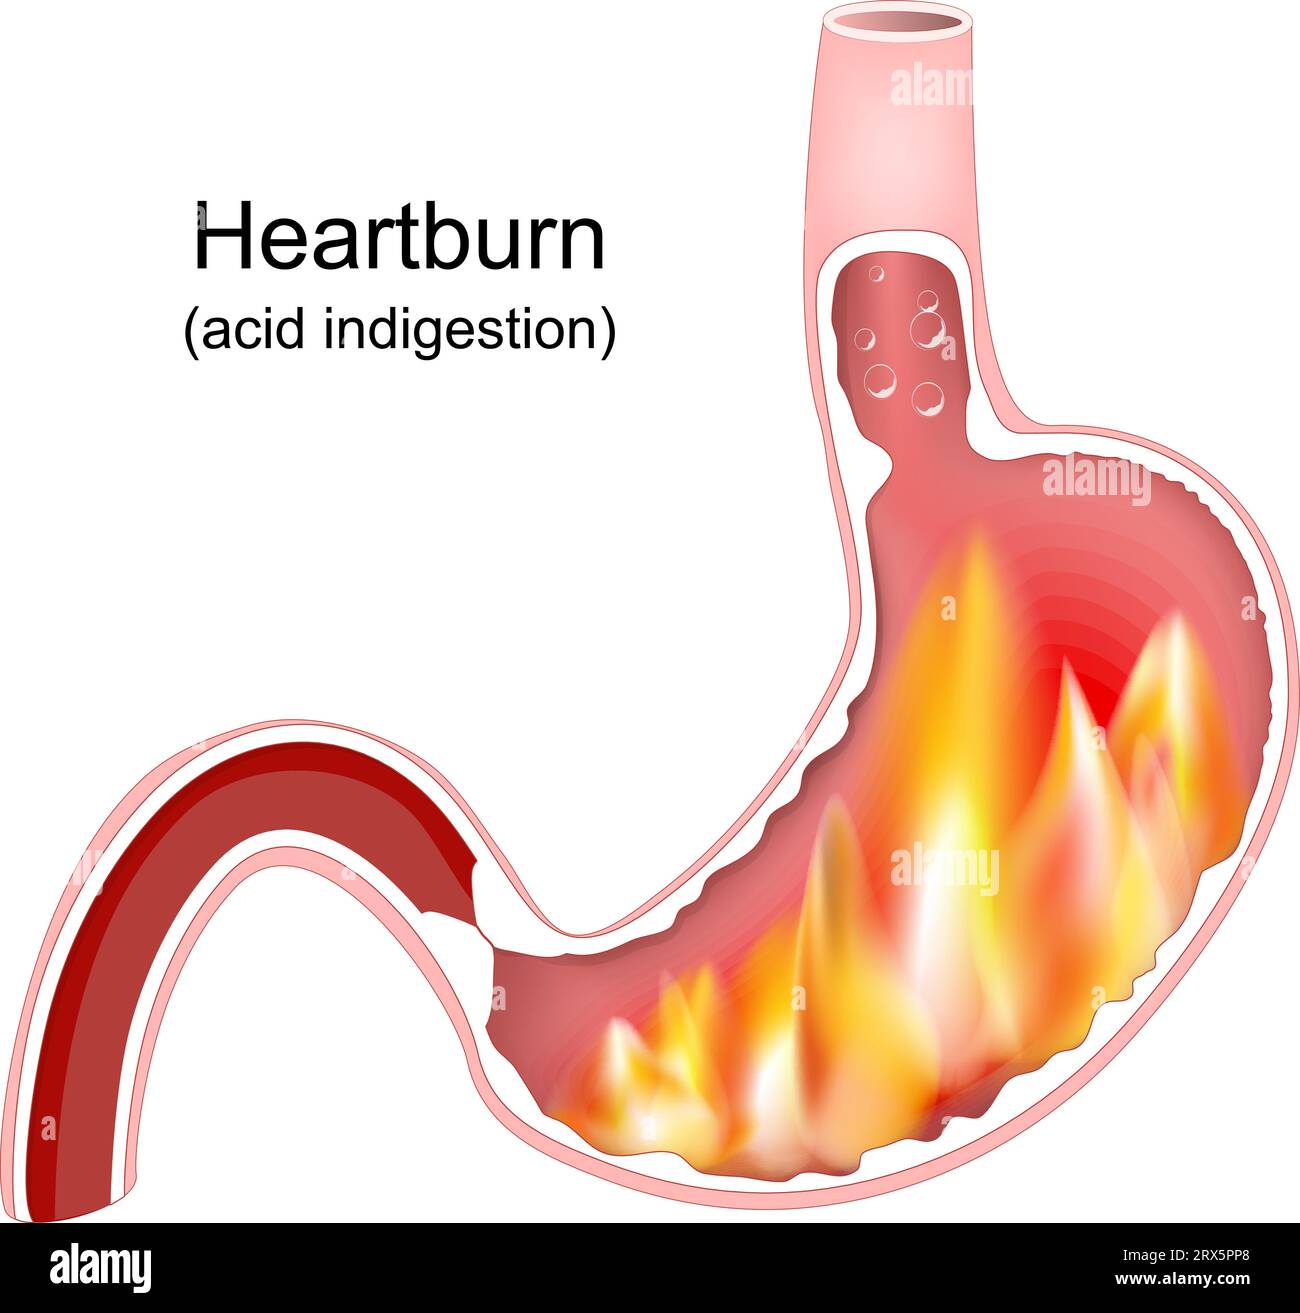 Heartburn. Cross section of a stomach with flame. Pyrosis, cardialgia or acid indigestion. burning sensation in the stomach. Gastroesophageal reflux d Stock Vector